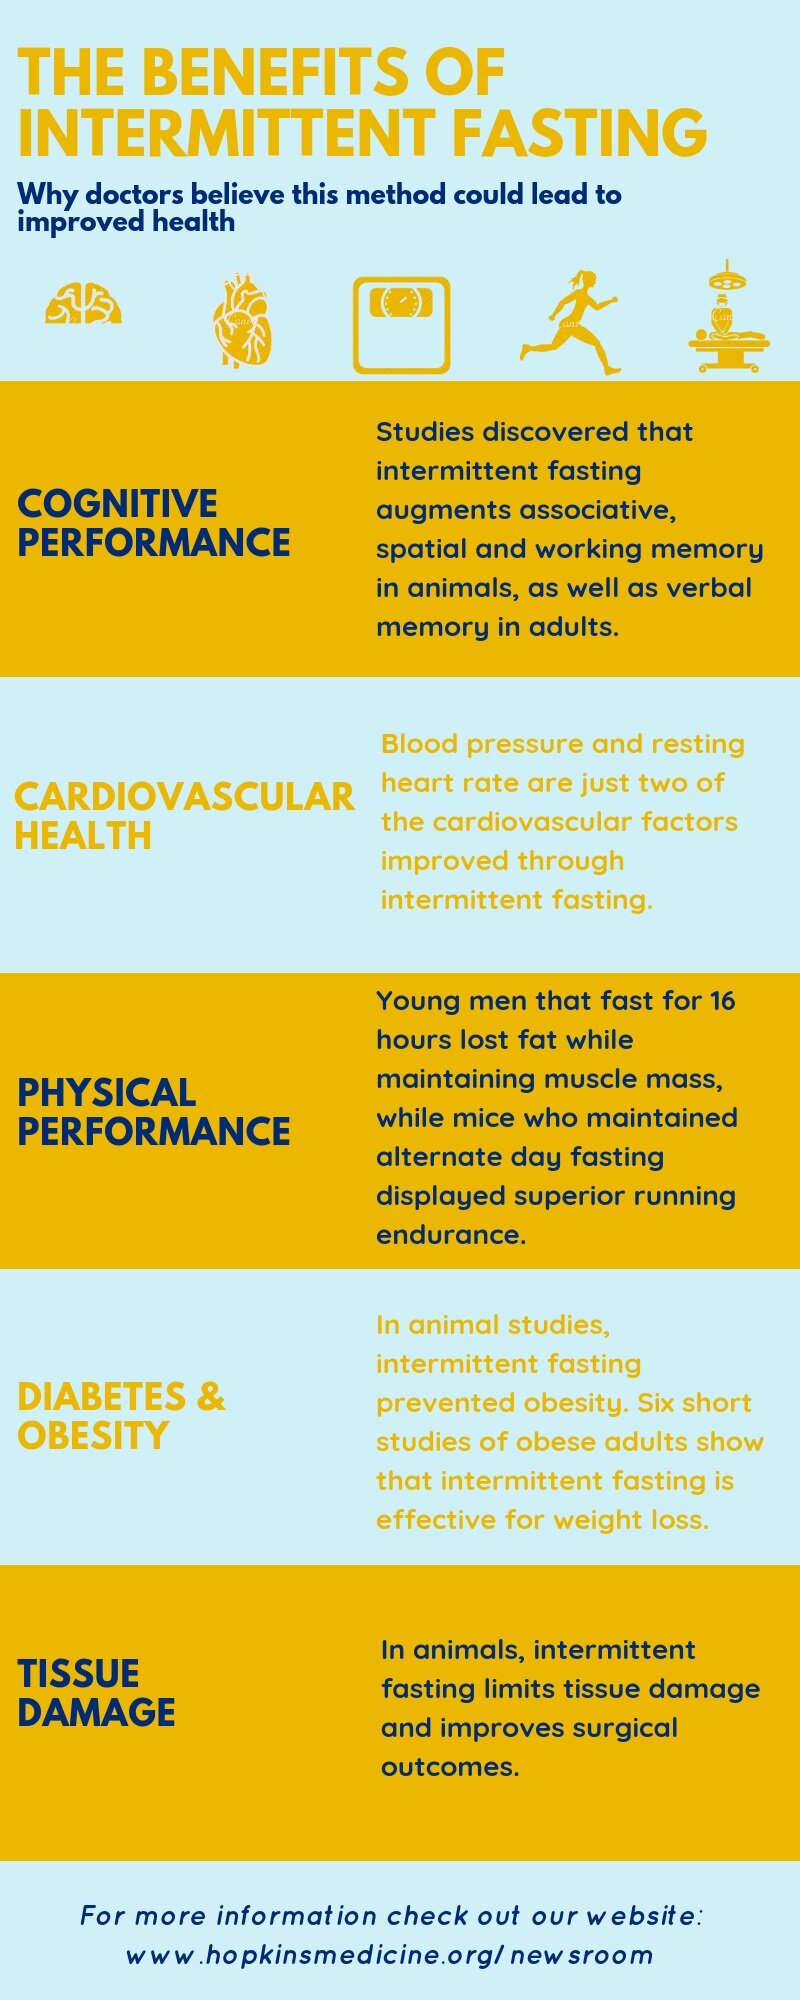 The benefits of intermittent fasting - Why doctors believe this method could lead to improved health - Image Credit: Johns Hopkins Medicine - (Click on image to see the entire list)